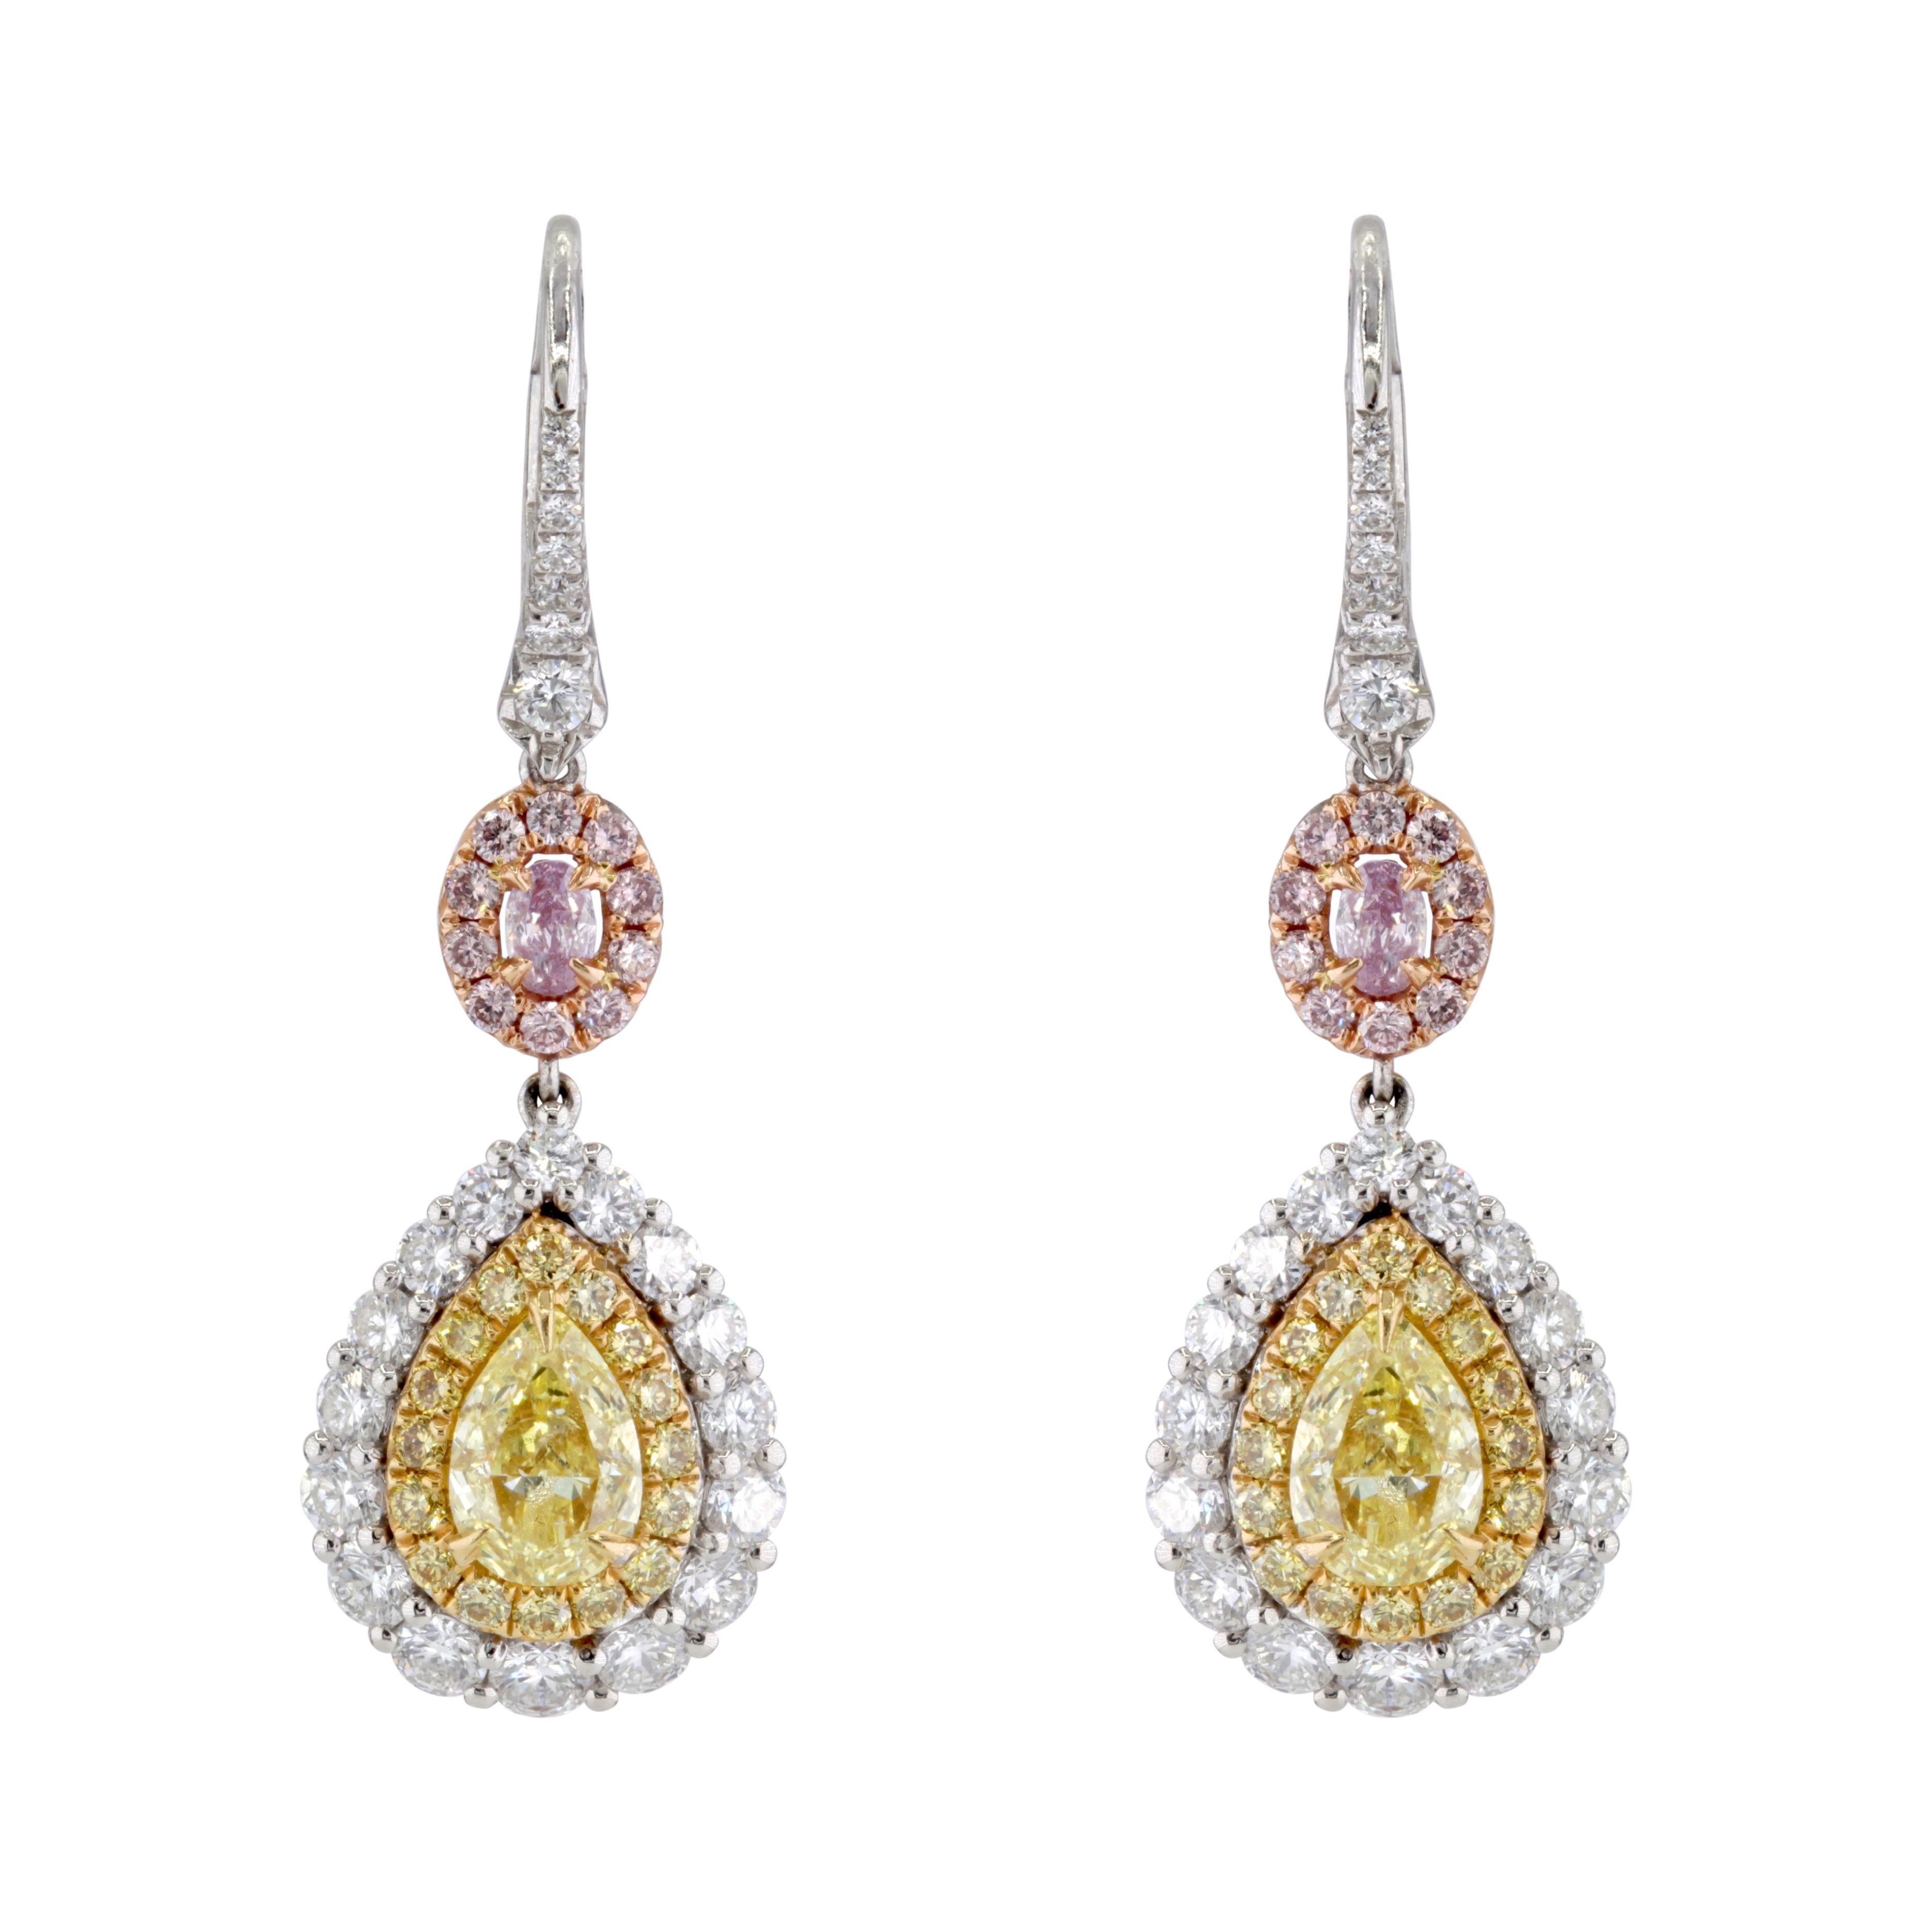 3.82 Ct T.W. GIA Certified Natural Fcy Yellow and Pink Diamond Earrings ref1072 For Sale 2